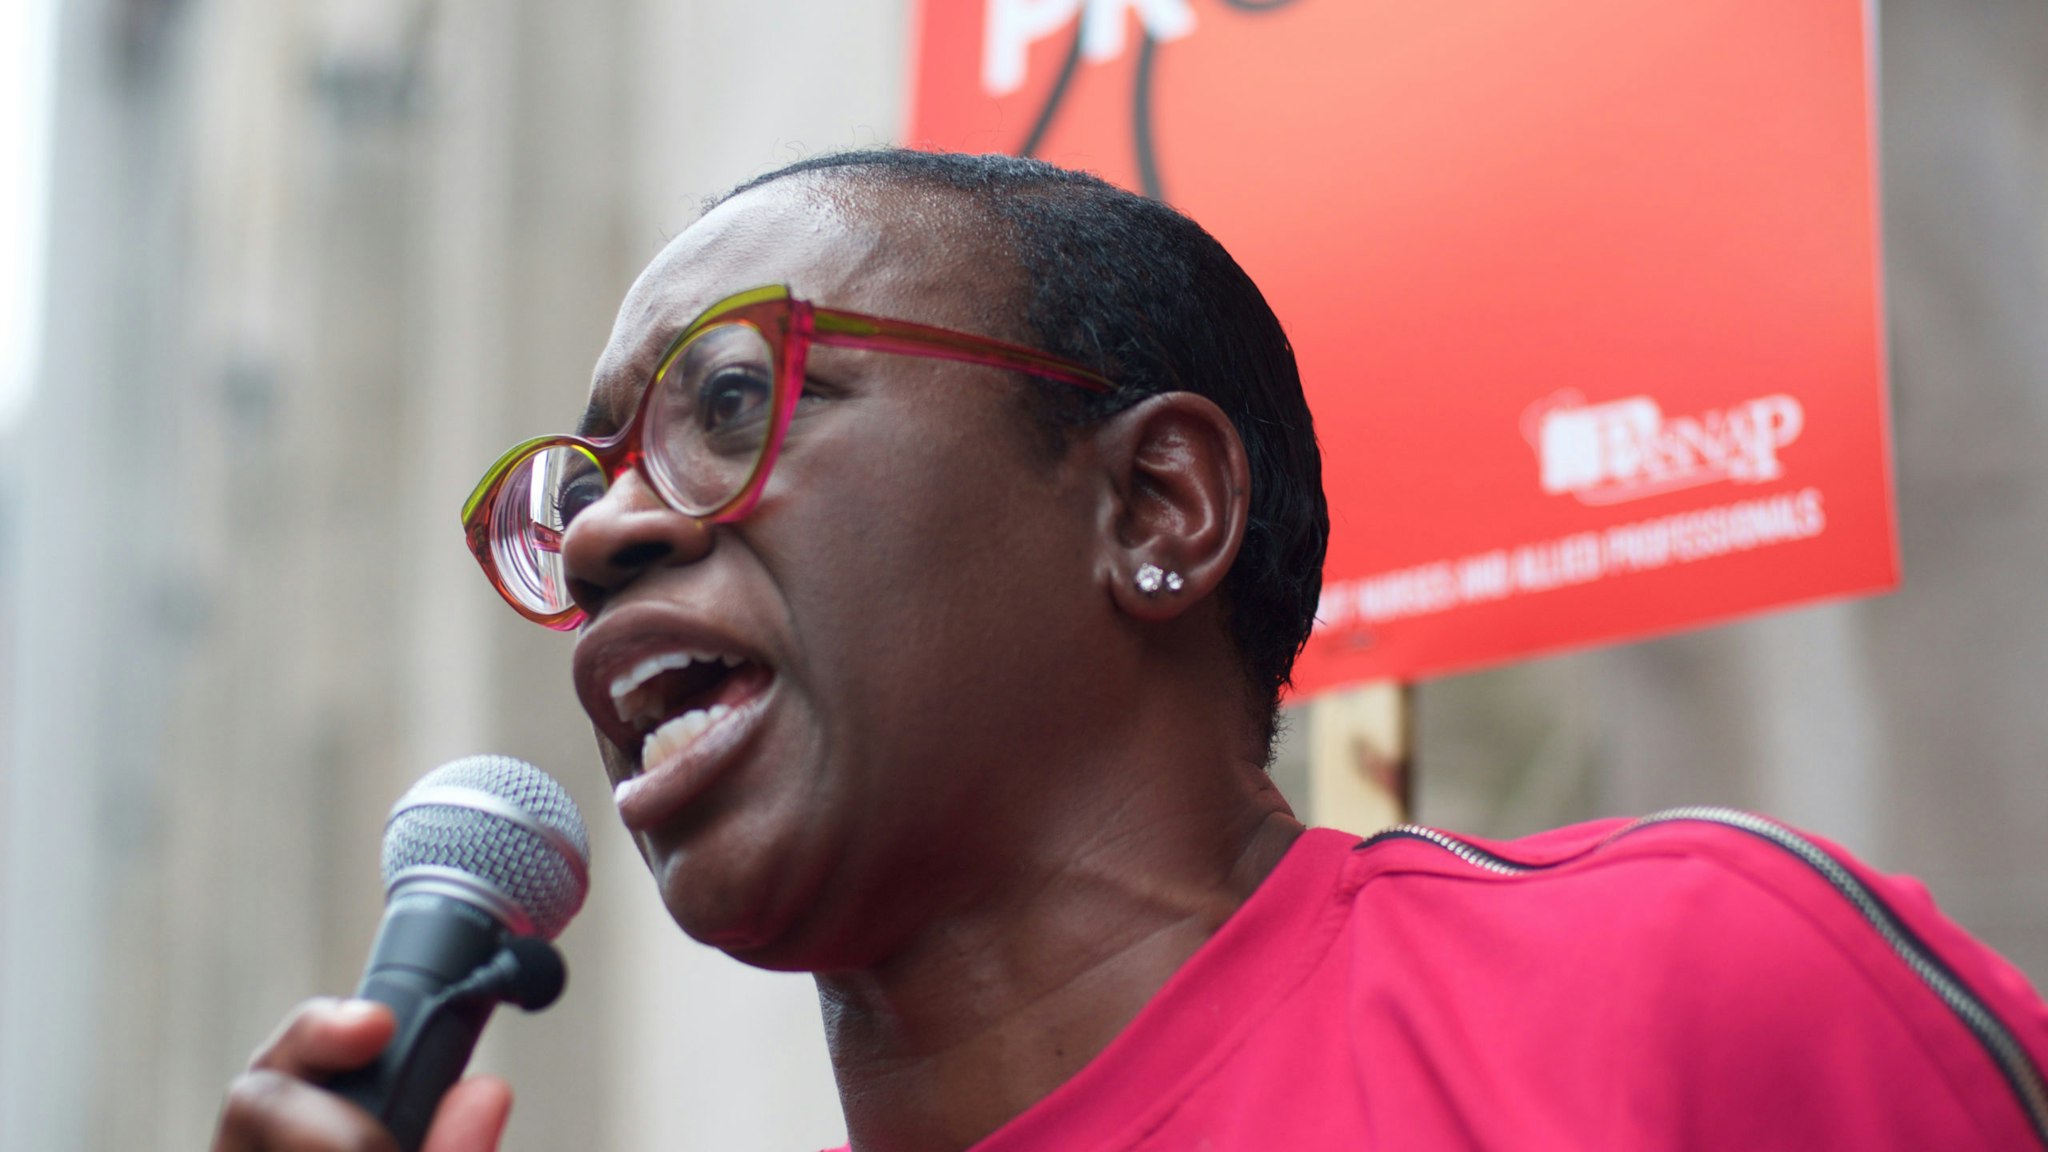 Bernie2020 campaign co-chair Sen. Nina Turner speaks during a rally with, hospital workers, union members and local politicians outside Hahnemann University Hospital at a rally outside the Center City facilities in Philadelphia, PA on July 11, 2019. The struggling Center City located hospital announced it will seize operations and is facing out critical services like Emergency access and the maternity ward unless support is found to end the financial turmoil